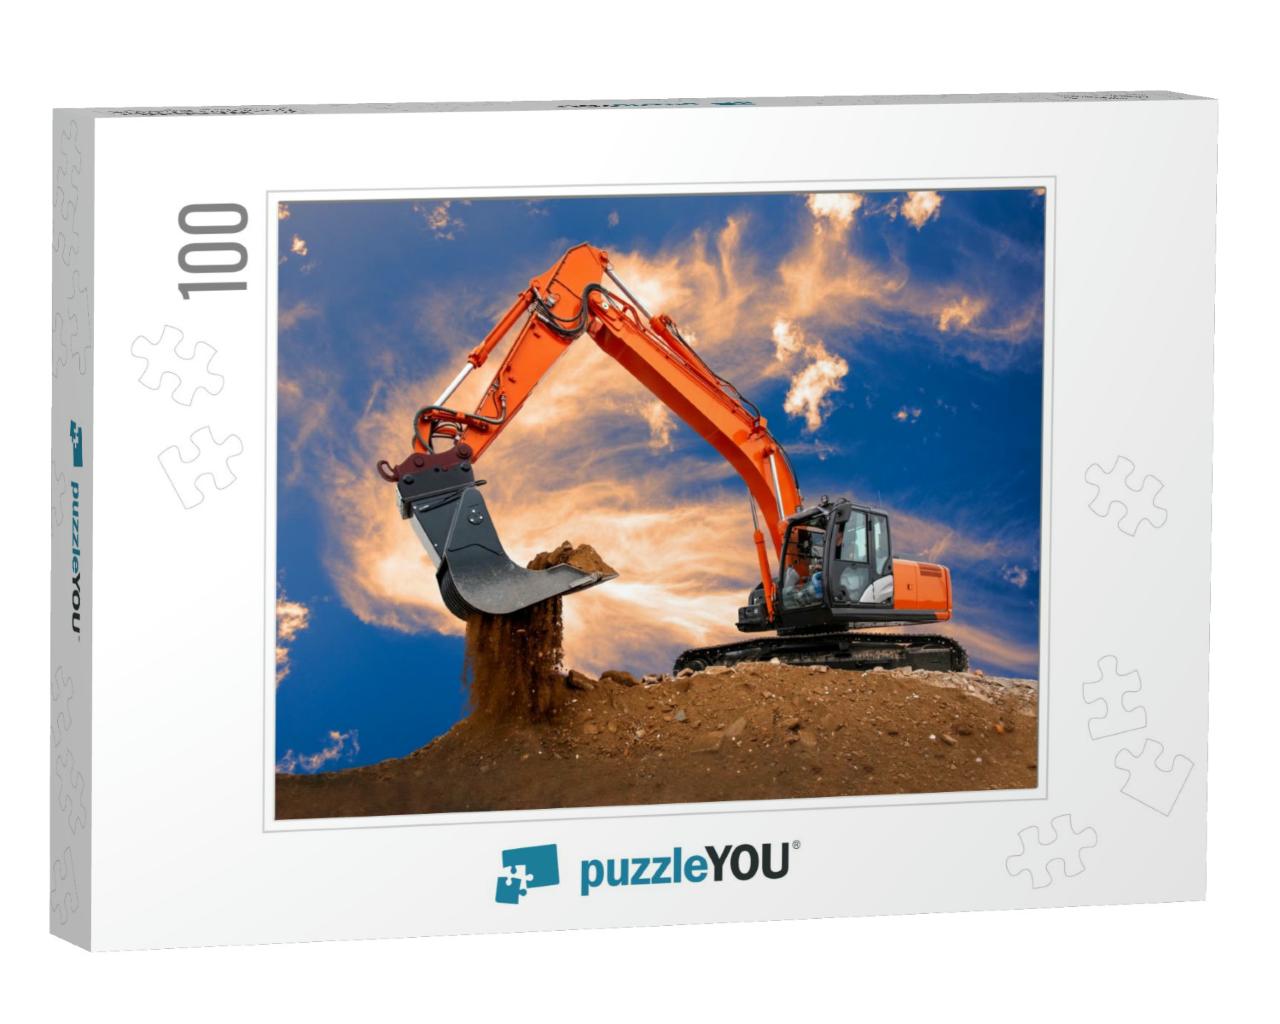 Excavator At Work on Construction Site... Jigsaw Puzzle with 100 pieces